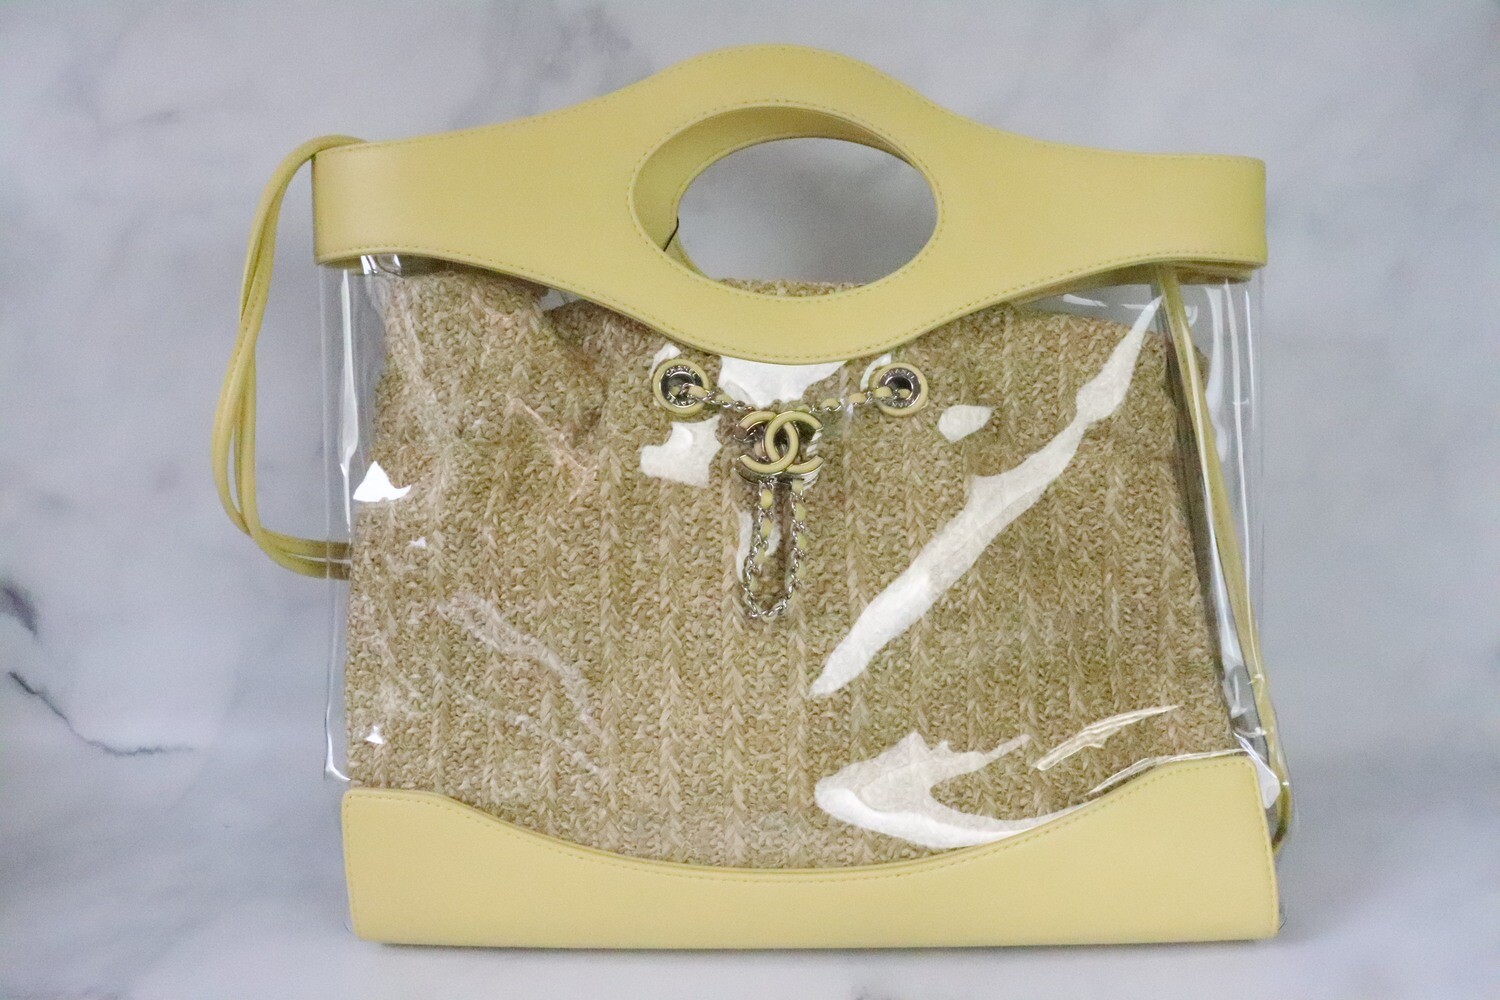 Chanel 31 Tote Yellow, Like New in Dustbag WA001